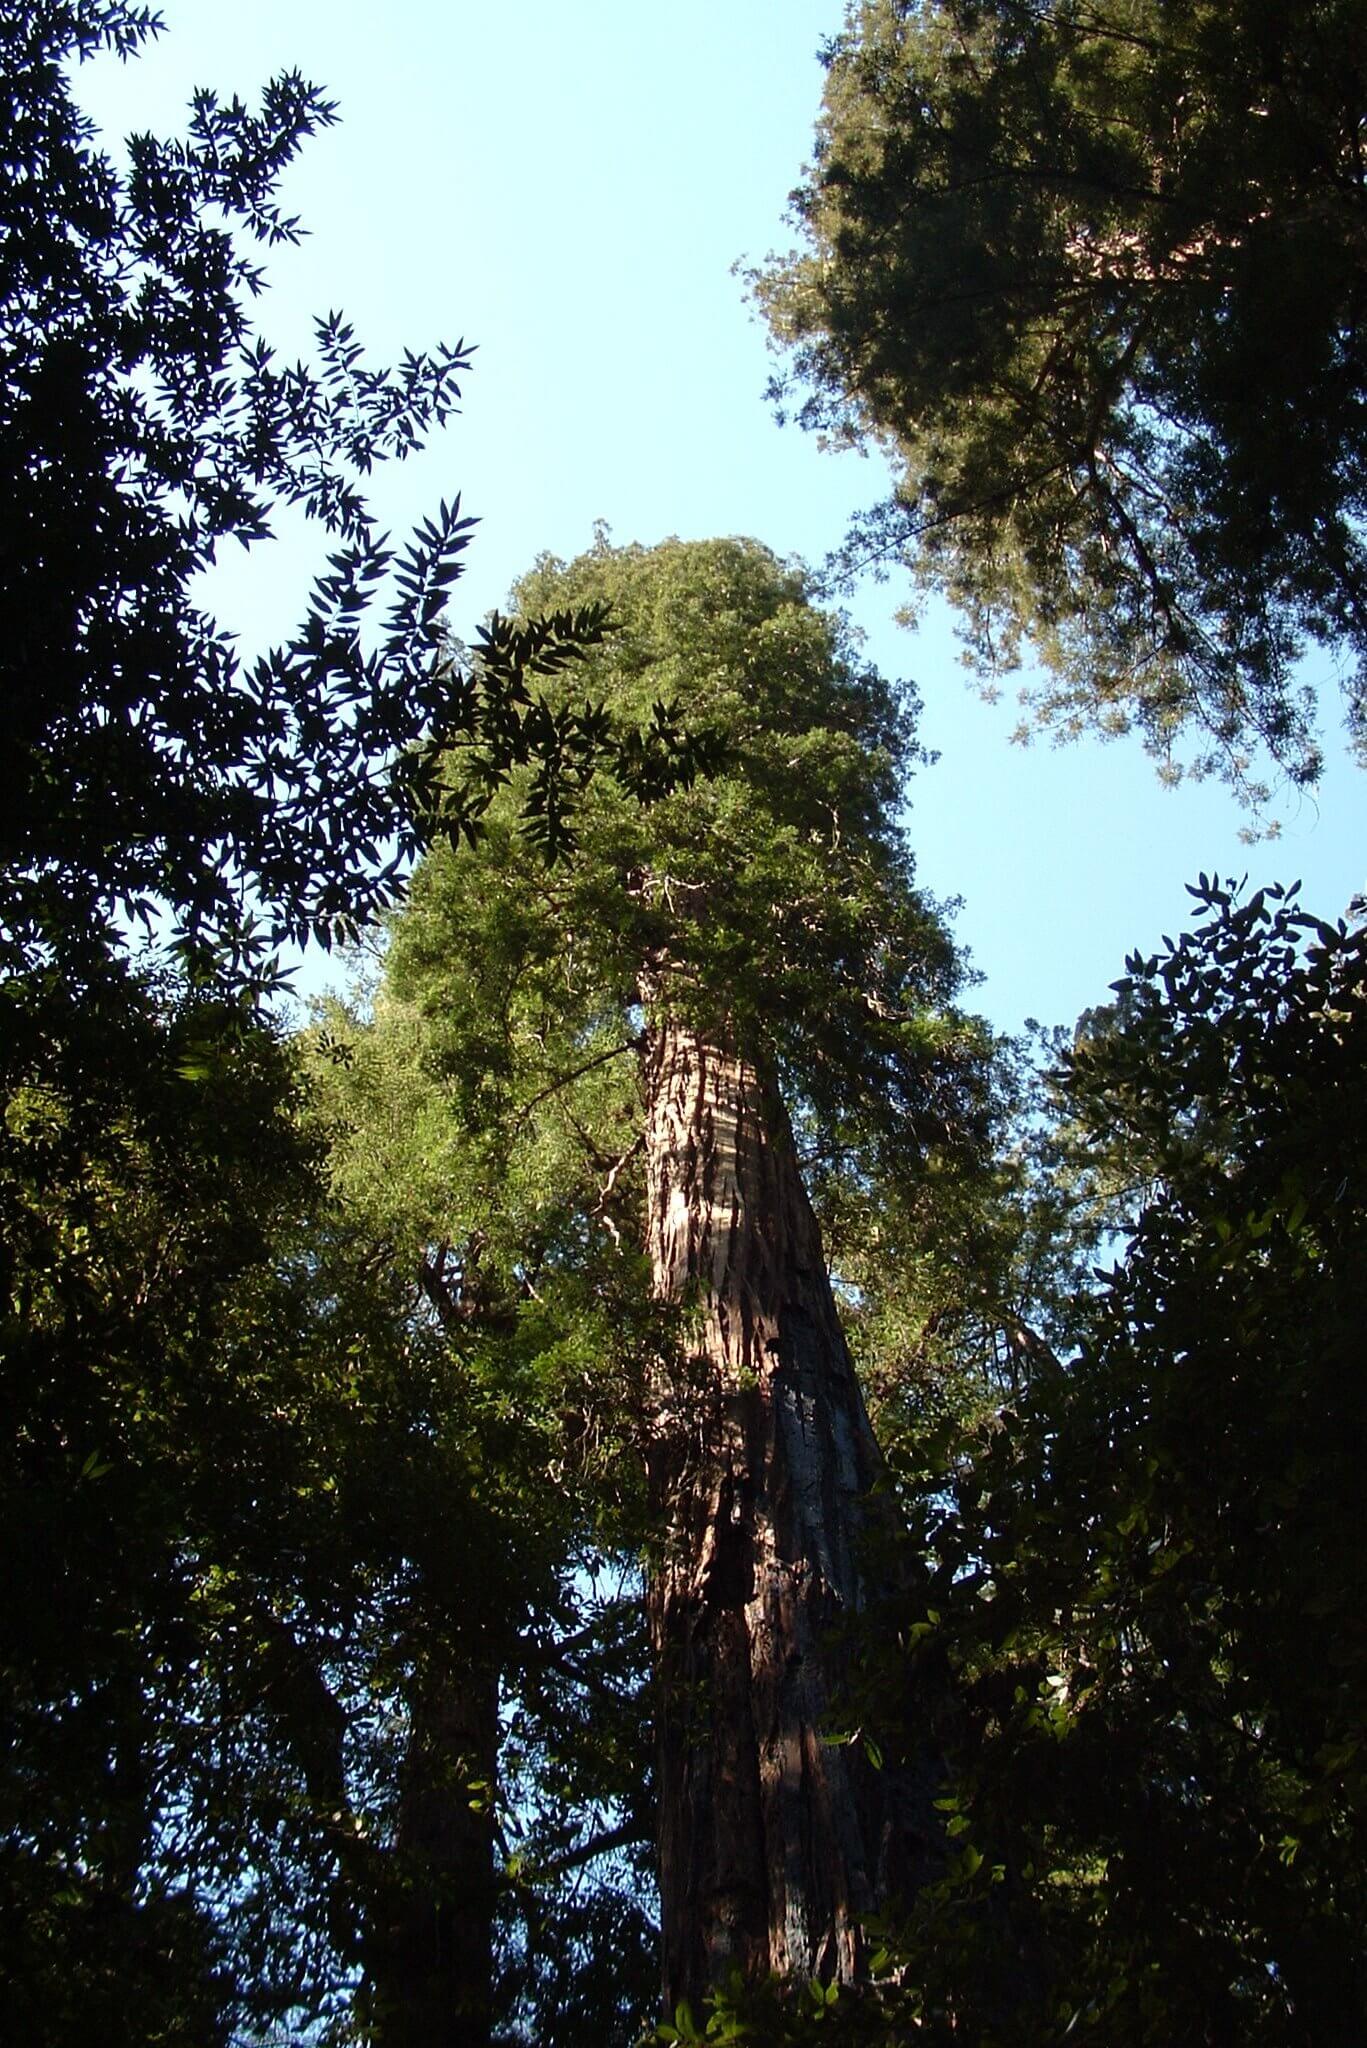 Portola Redwoods The Old Tree by Johnson Earls